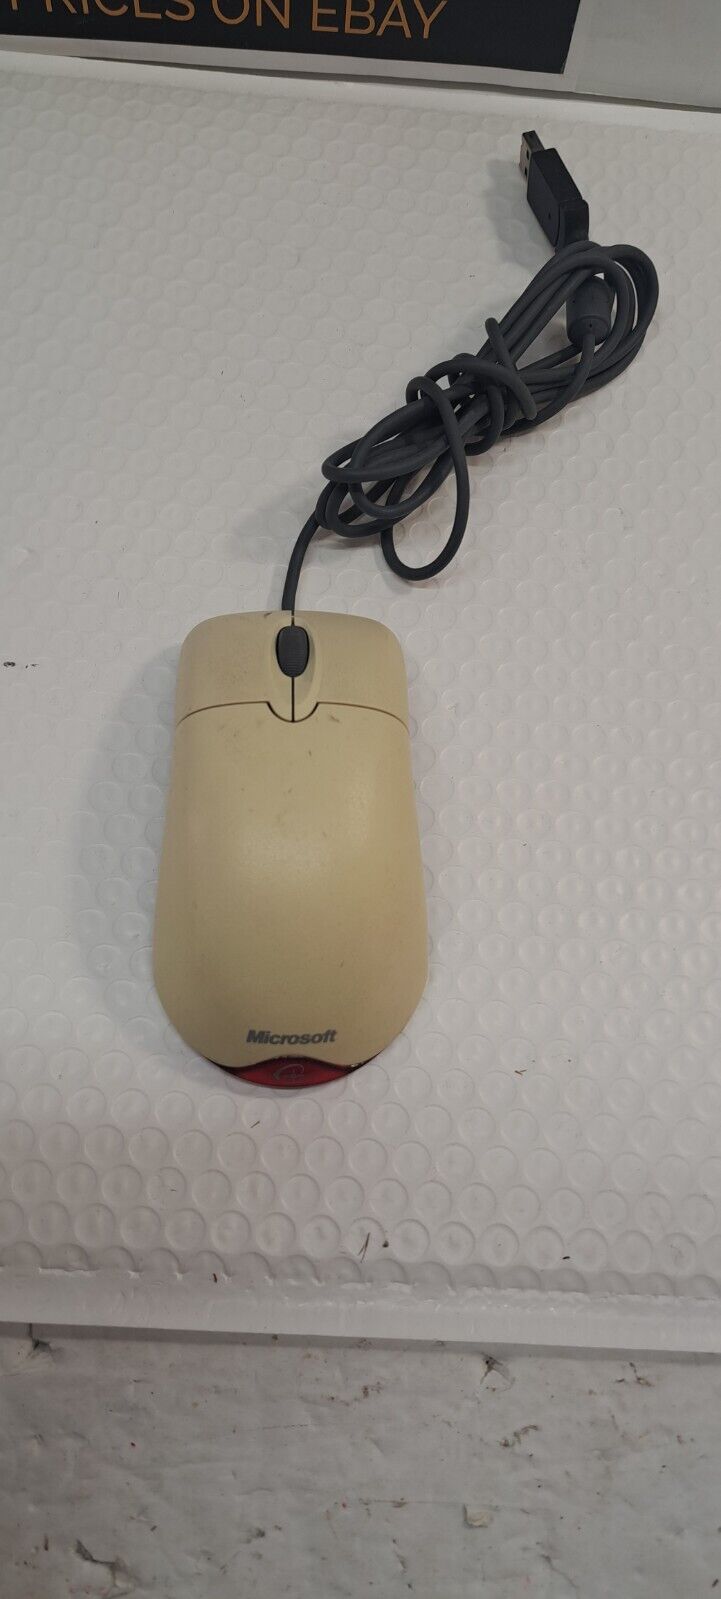 Vintage Off White Microsoft Wheel Mouse Optical USB Mouse 1.1/1.1a - Good+ Cond